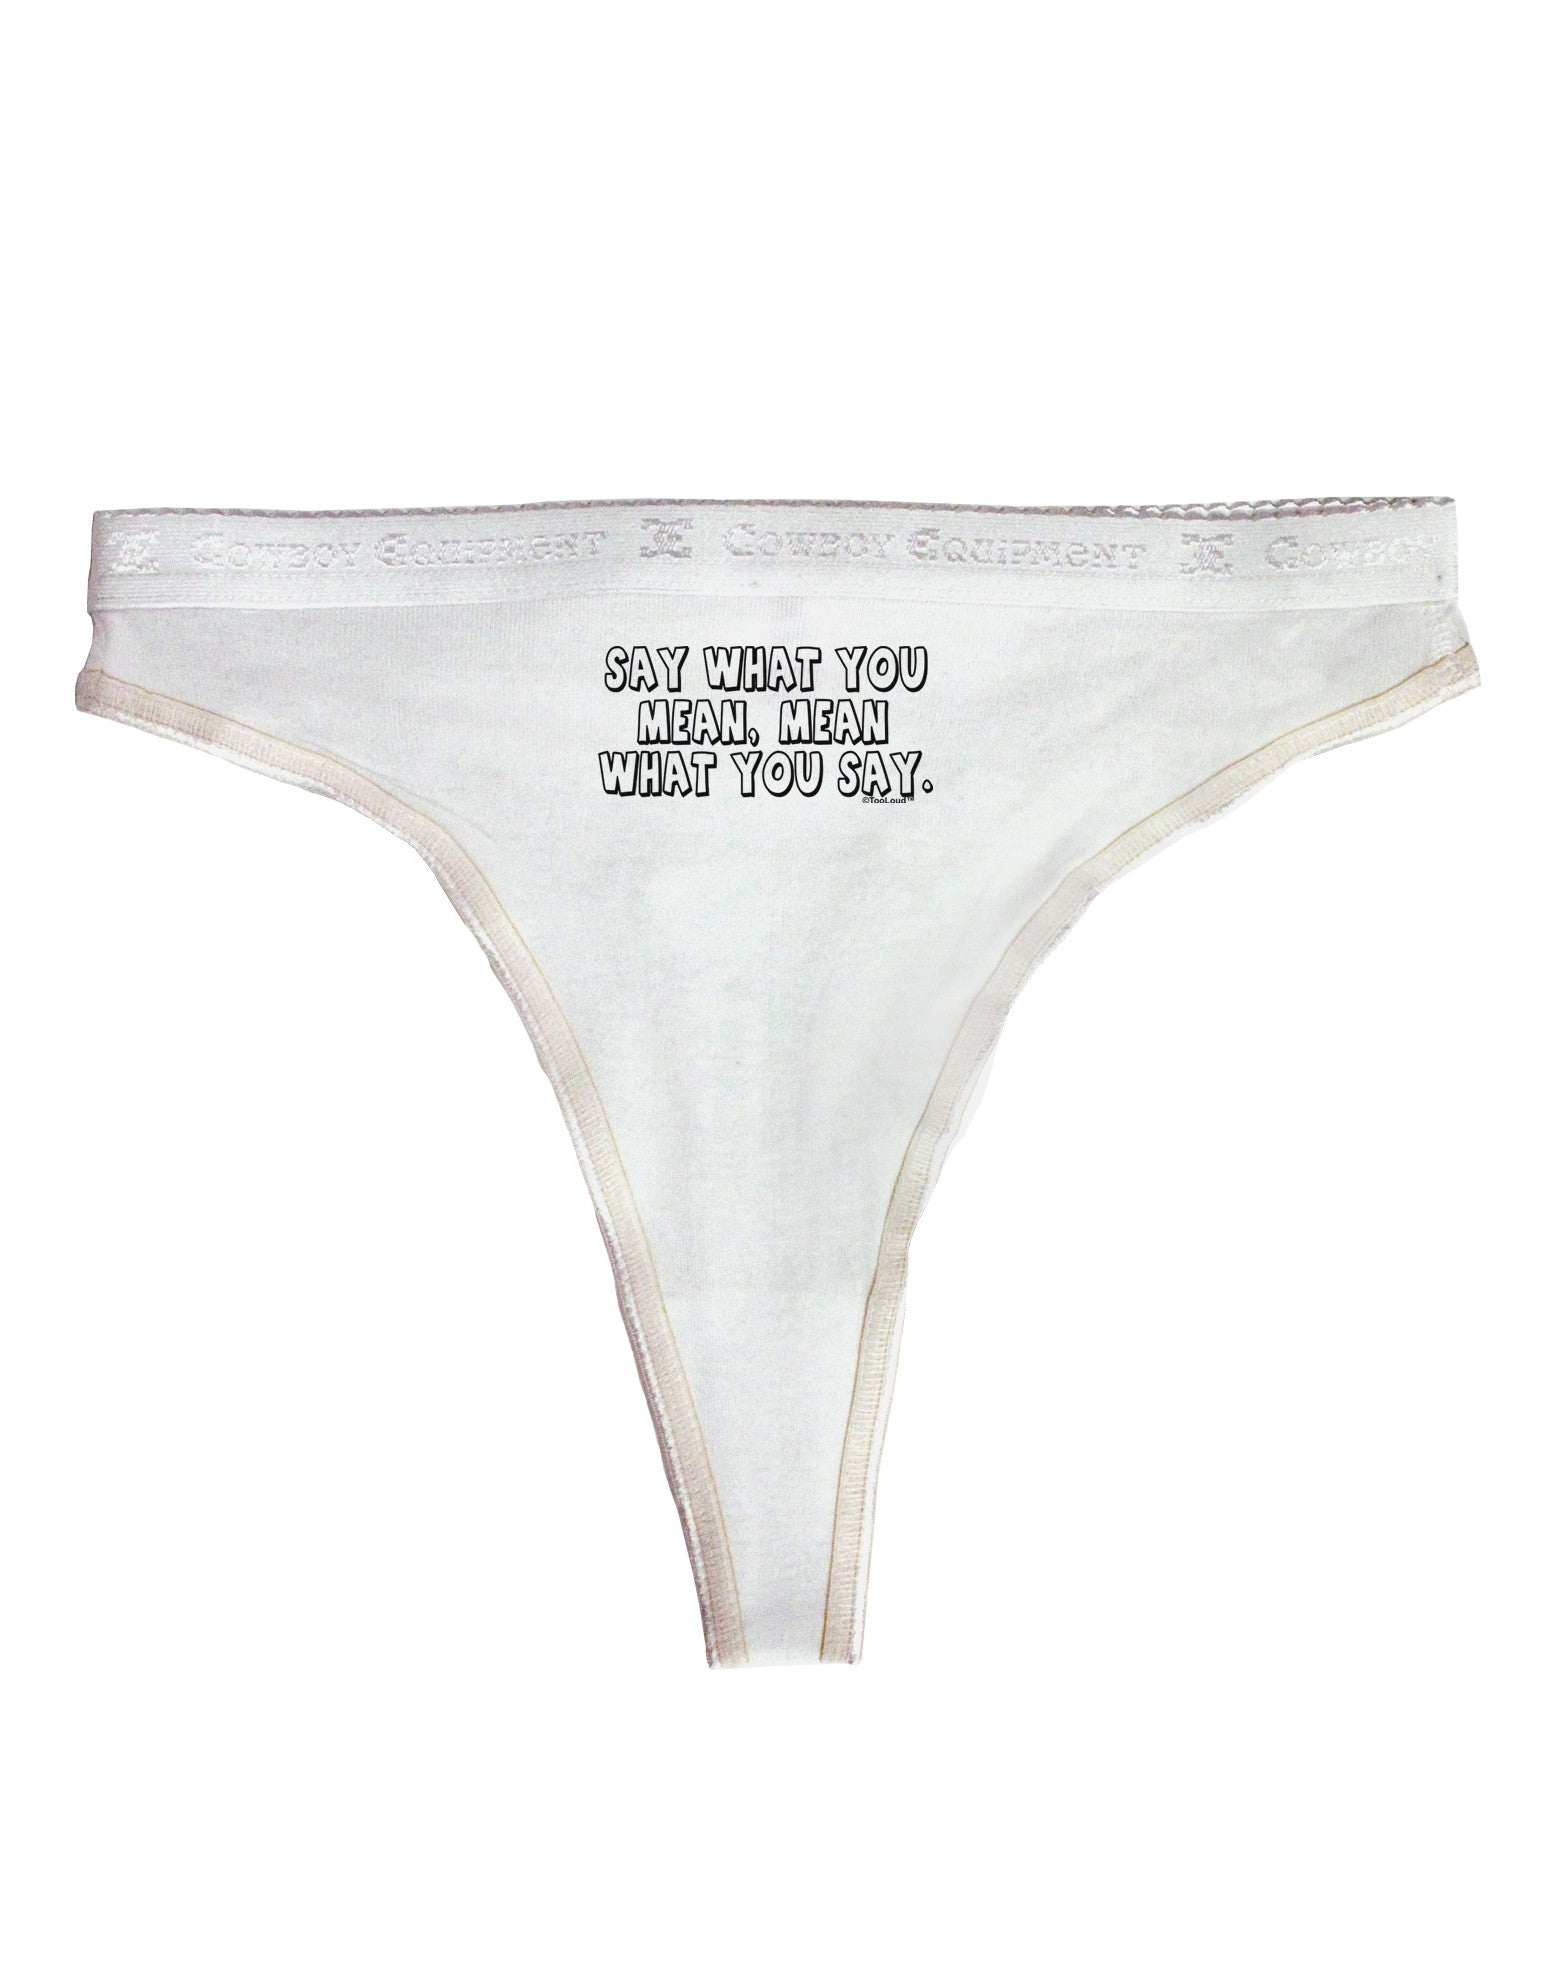 Say What You Mean Text Womens Thong Underwear by TooLoud